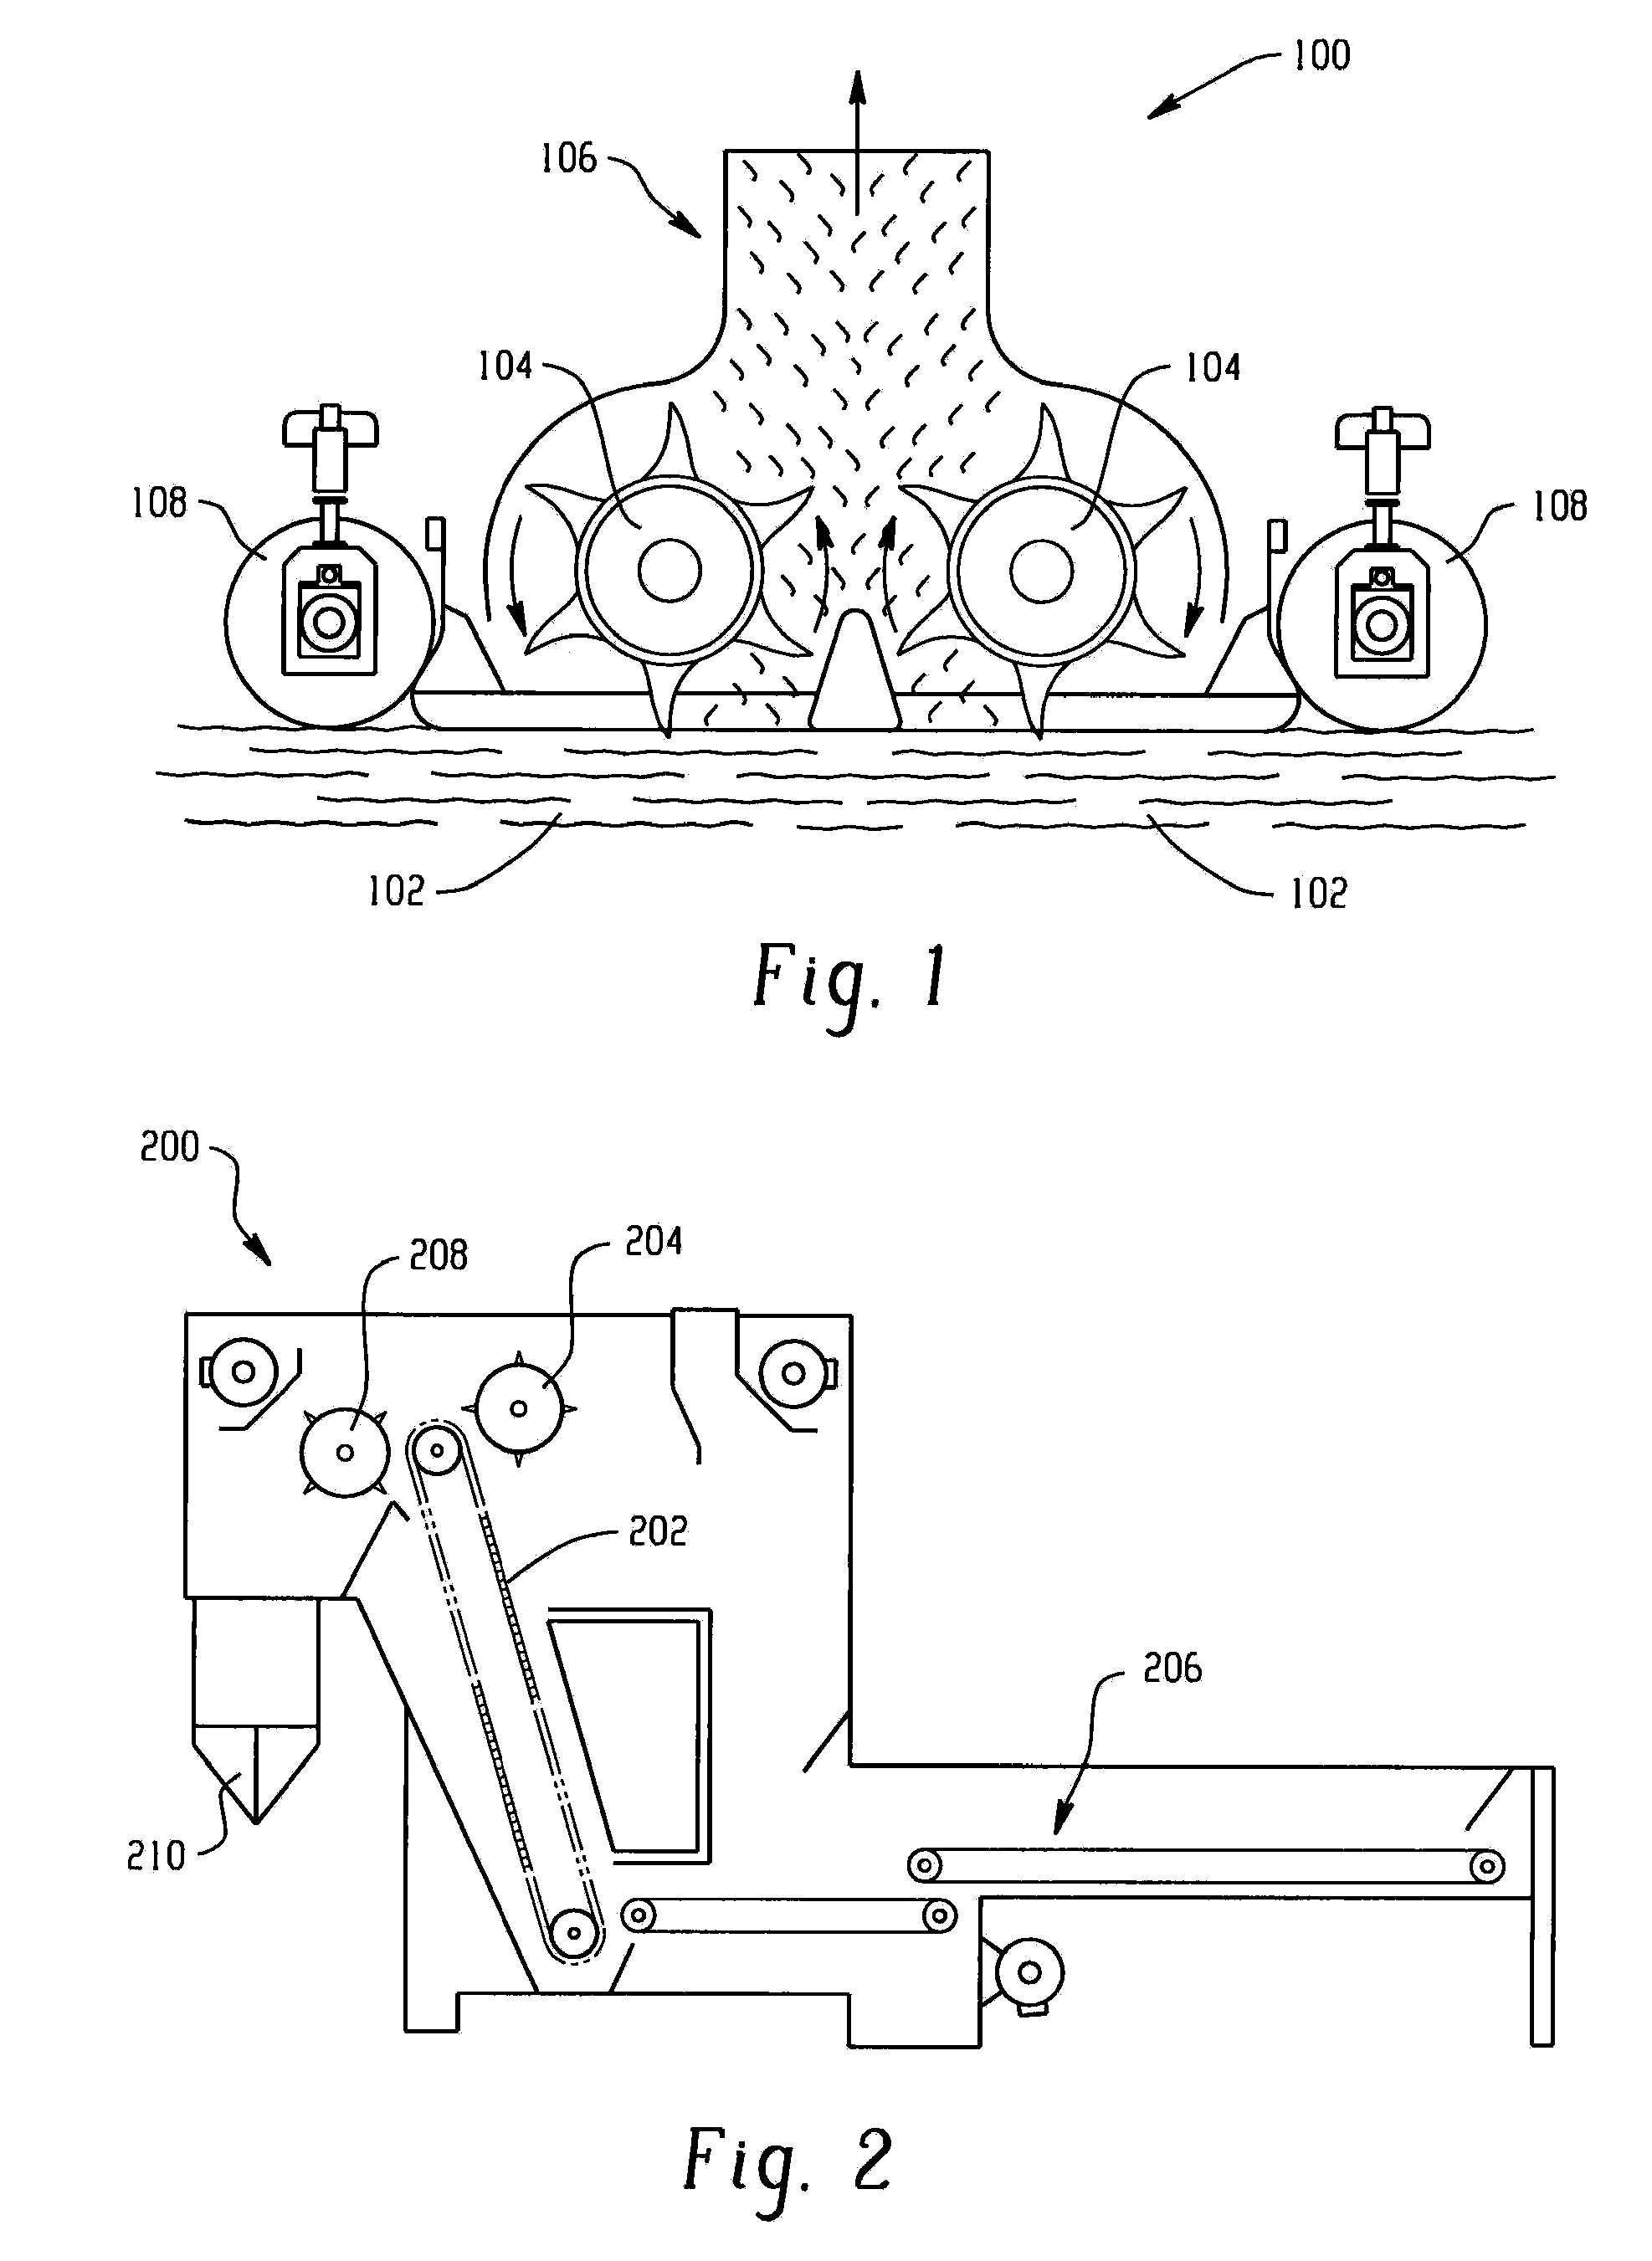 Process for making bamboo fiberfill and articles thereof